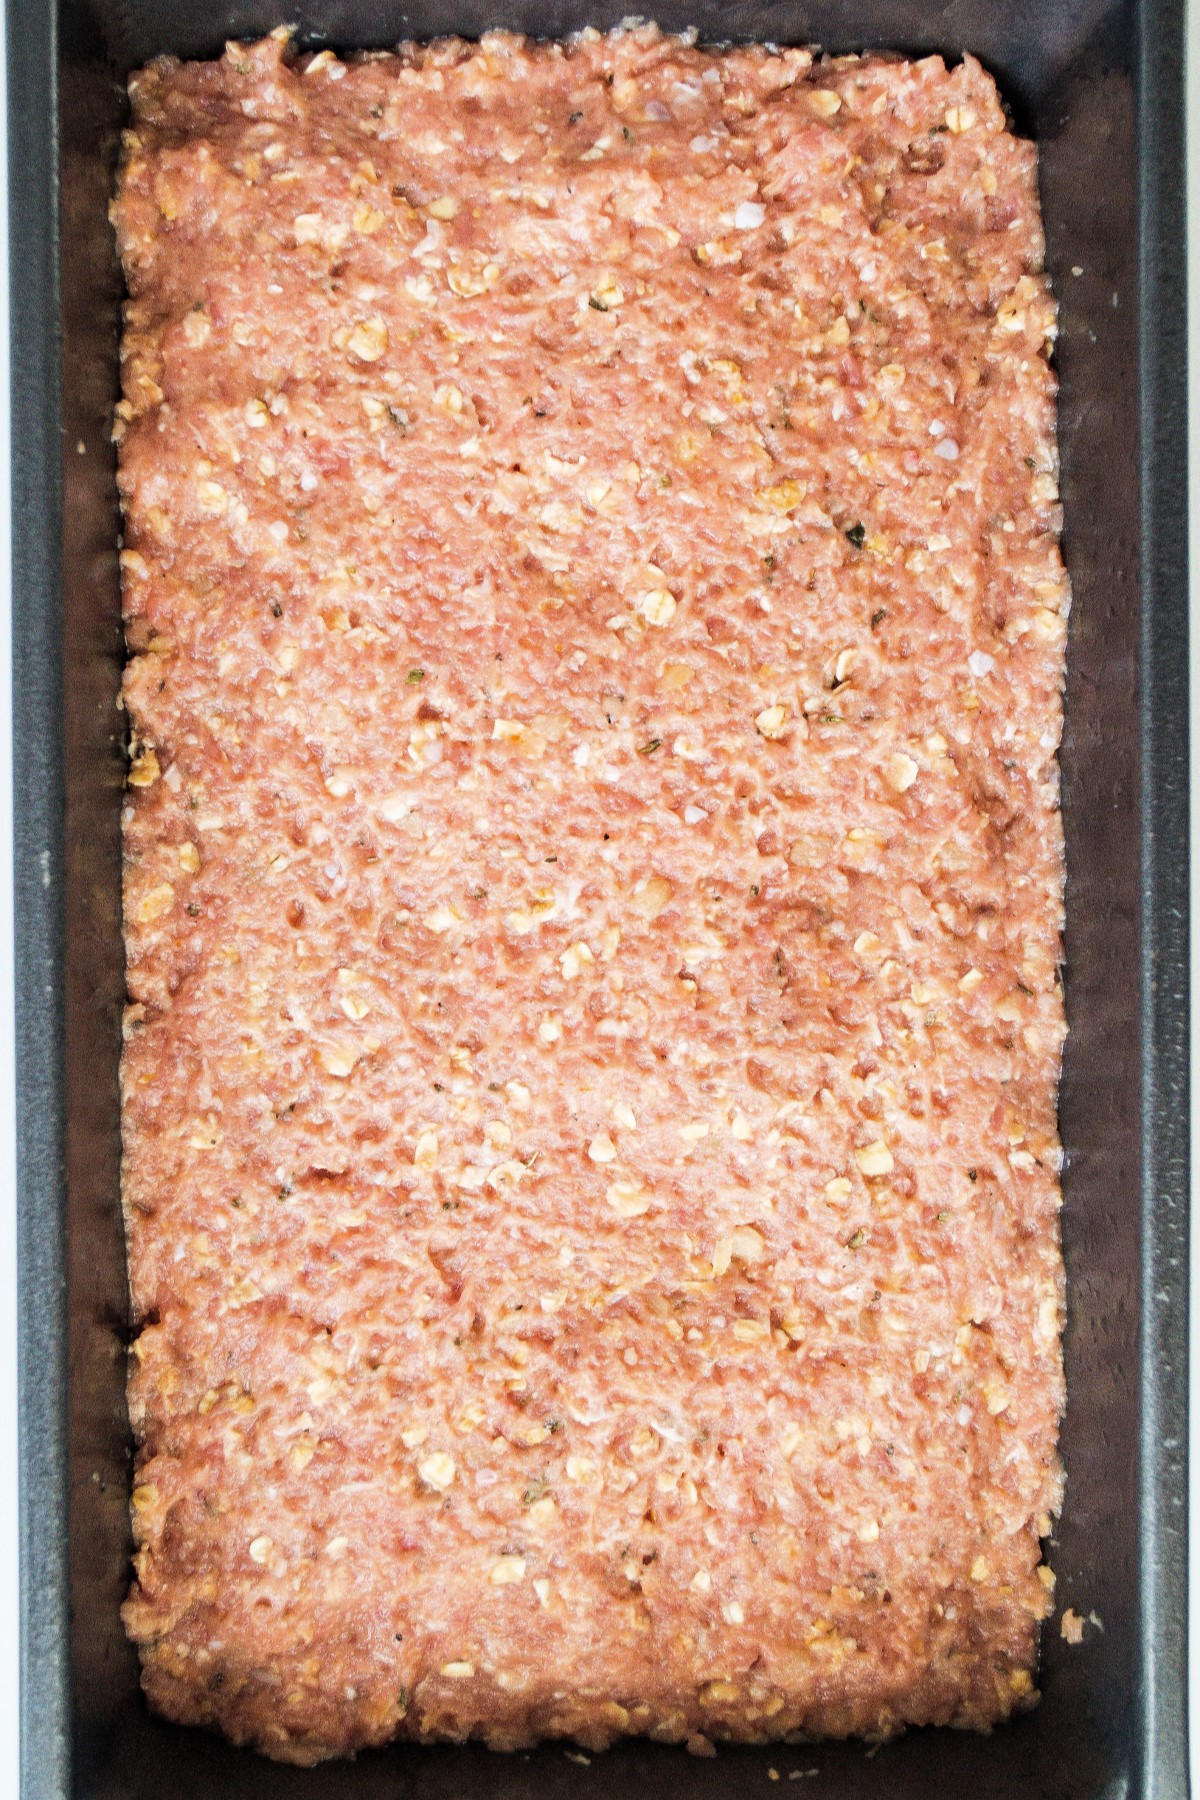 Turkey Meatloaf with Oats unbaked